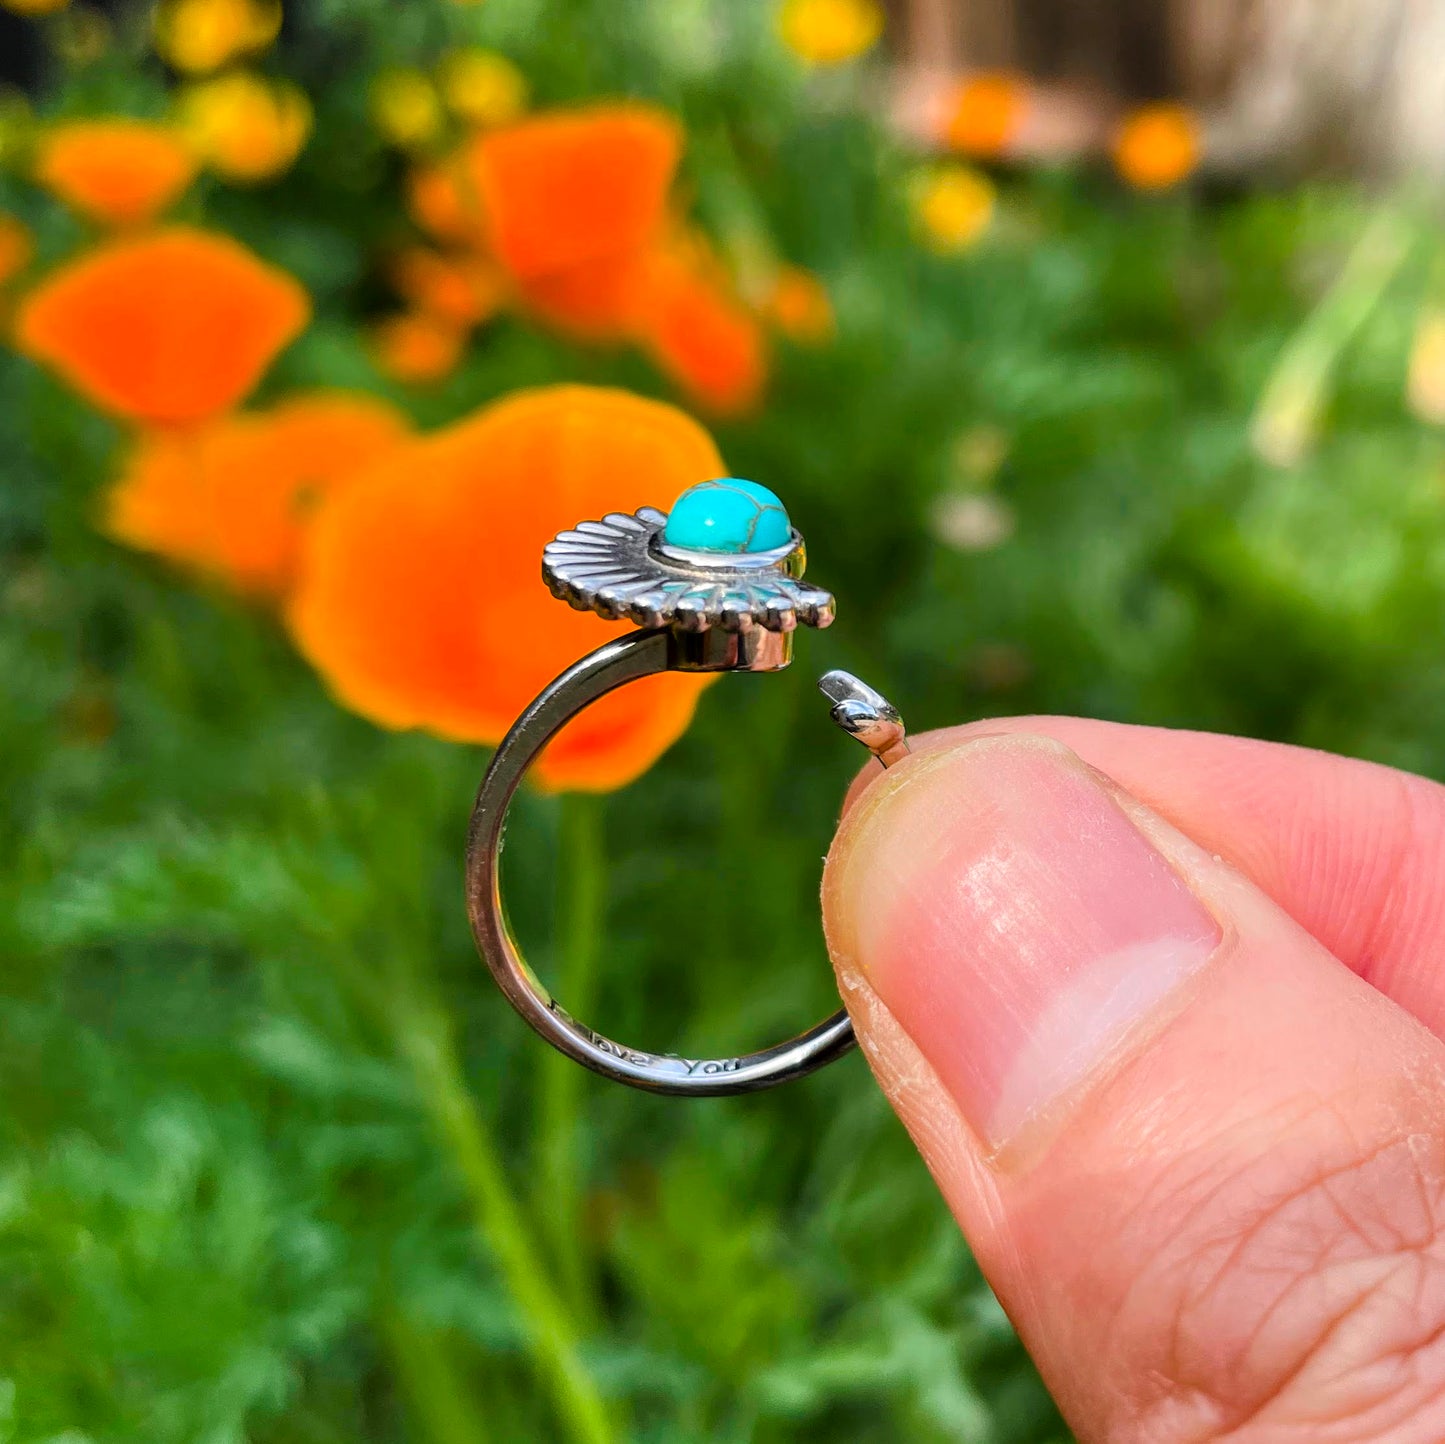 I Love You Ring Silver, Sun and Moon Spinner Ring in Silver, Spinner Ring, Anxiety Ring, Sunbeam Ring, Turquoise Fidget Ring, Gift for Mom,